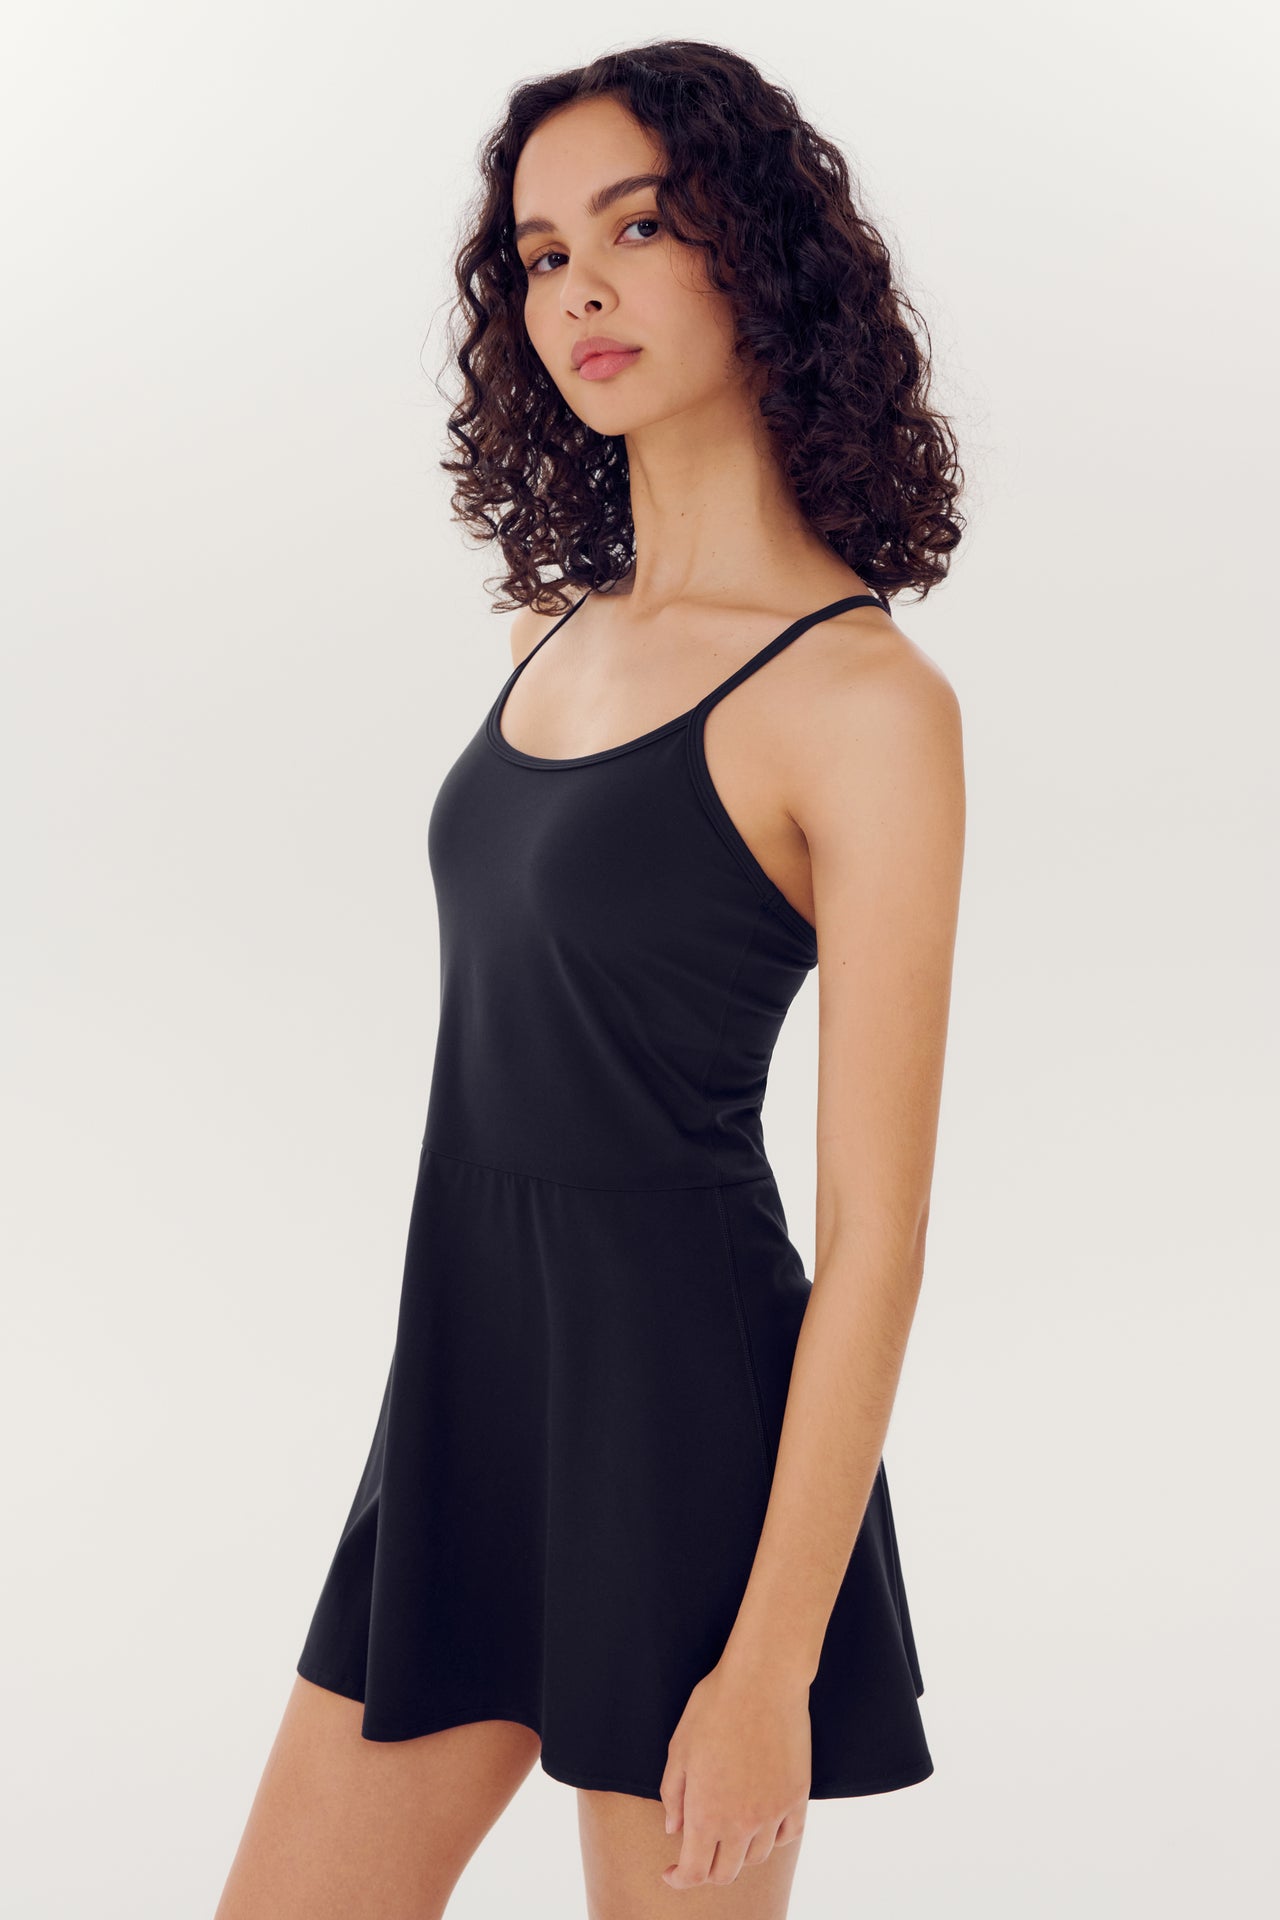 A woman in a SPLITS59 Simona Airweight Tank Dress - Black posing against a white background.